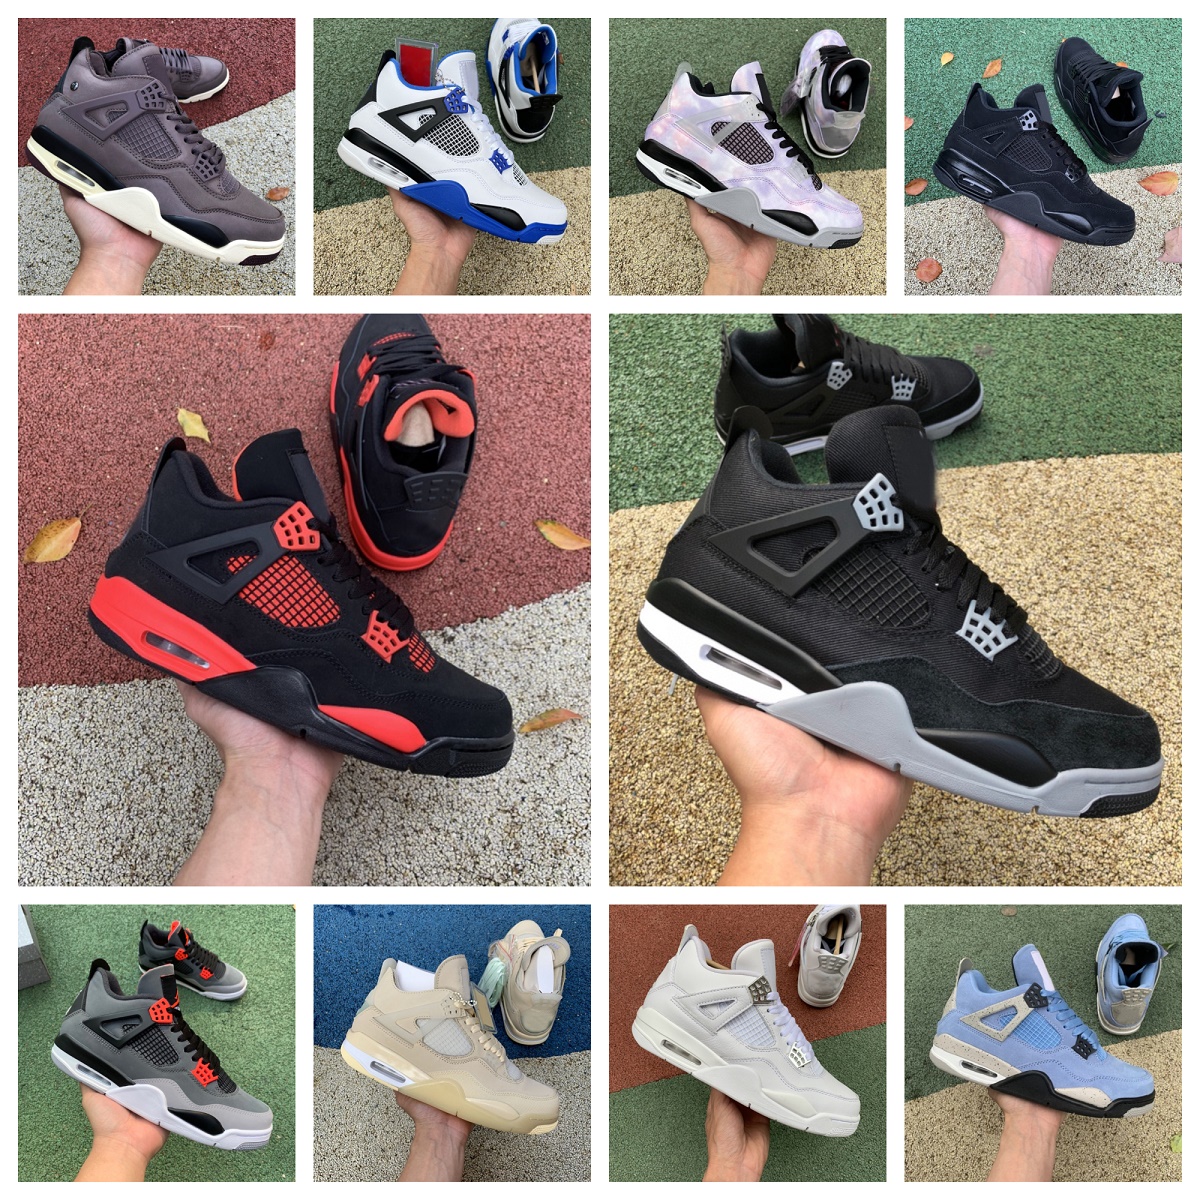 

Basketball Shoes Jumpman Retro 4 4s OG A Ma Maniere Union Guava Ice Sail White Oreo Midnight Navy University Blue Military Black Cat Infrared Bred Red Thunder Sneakers, Bubble package bag